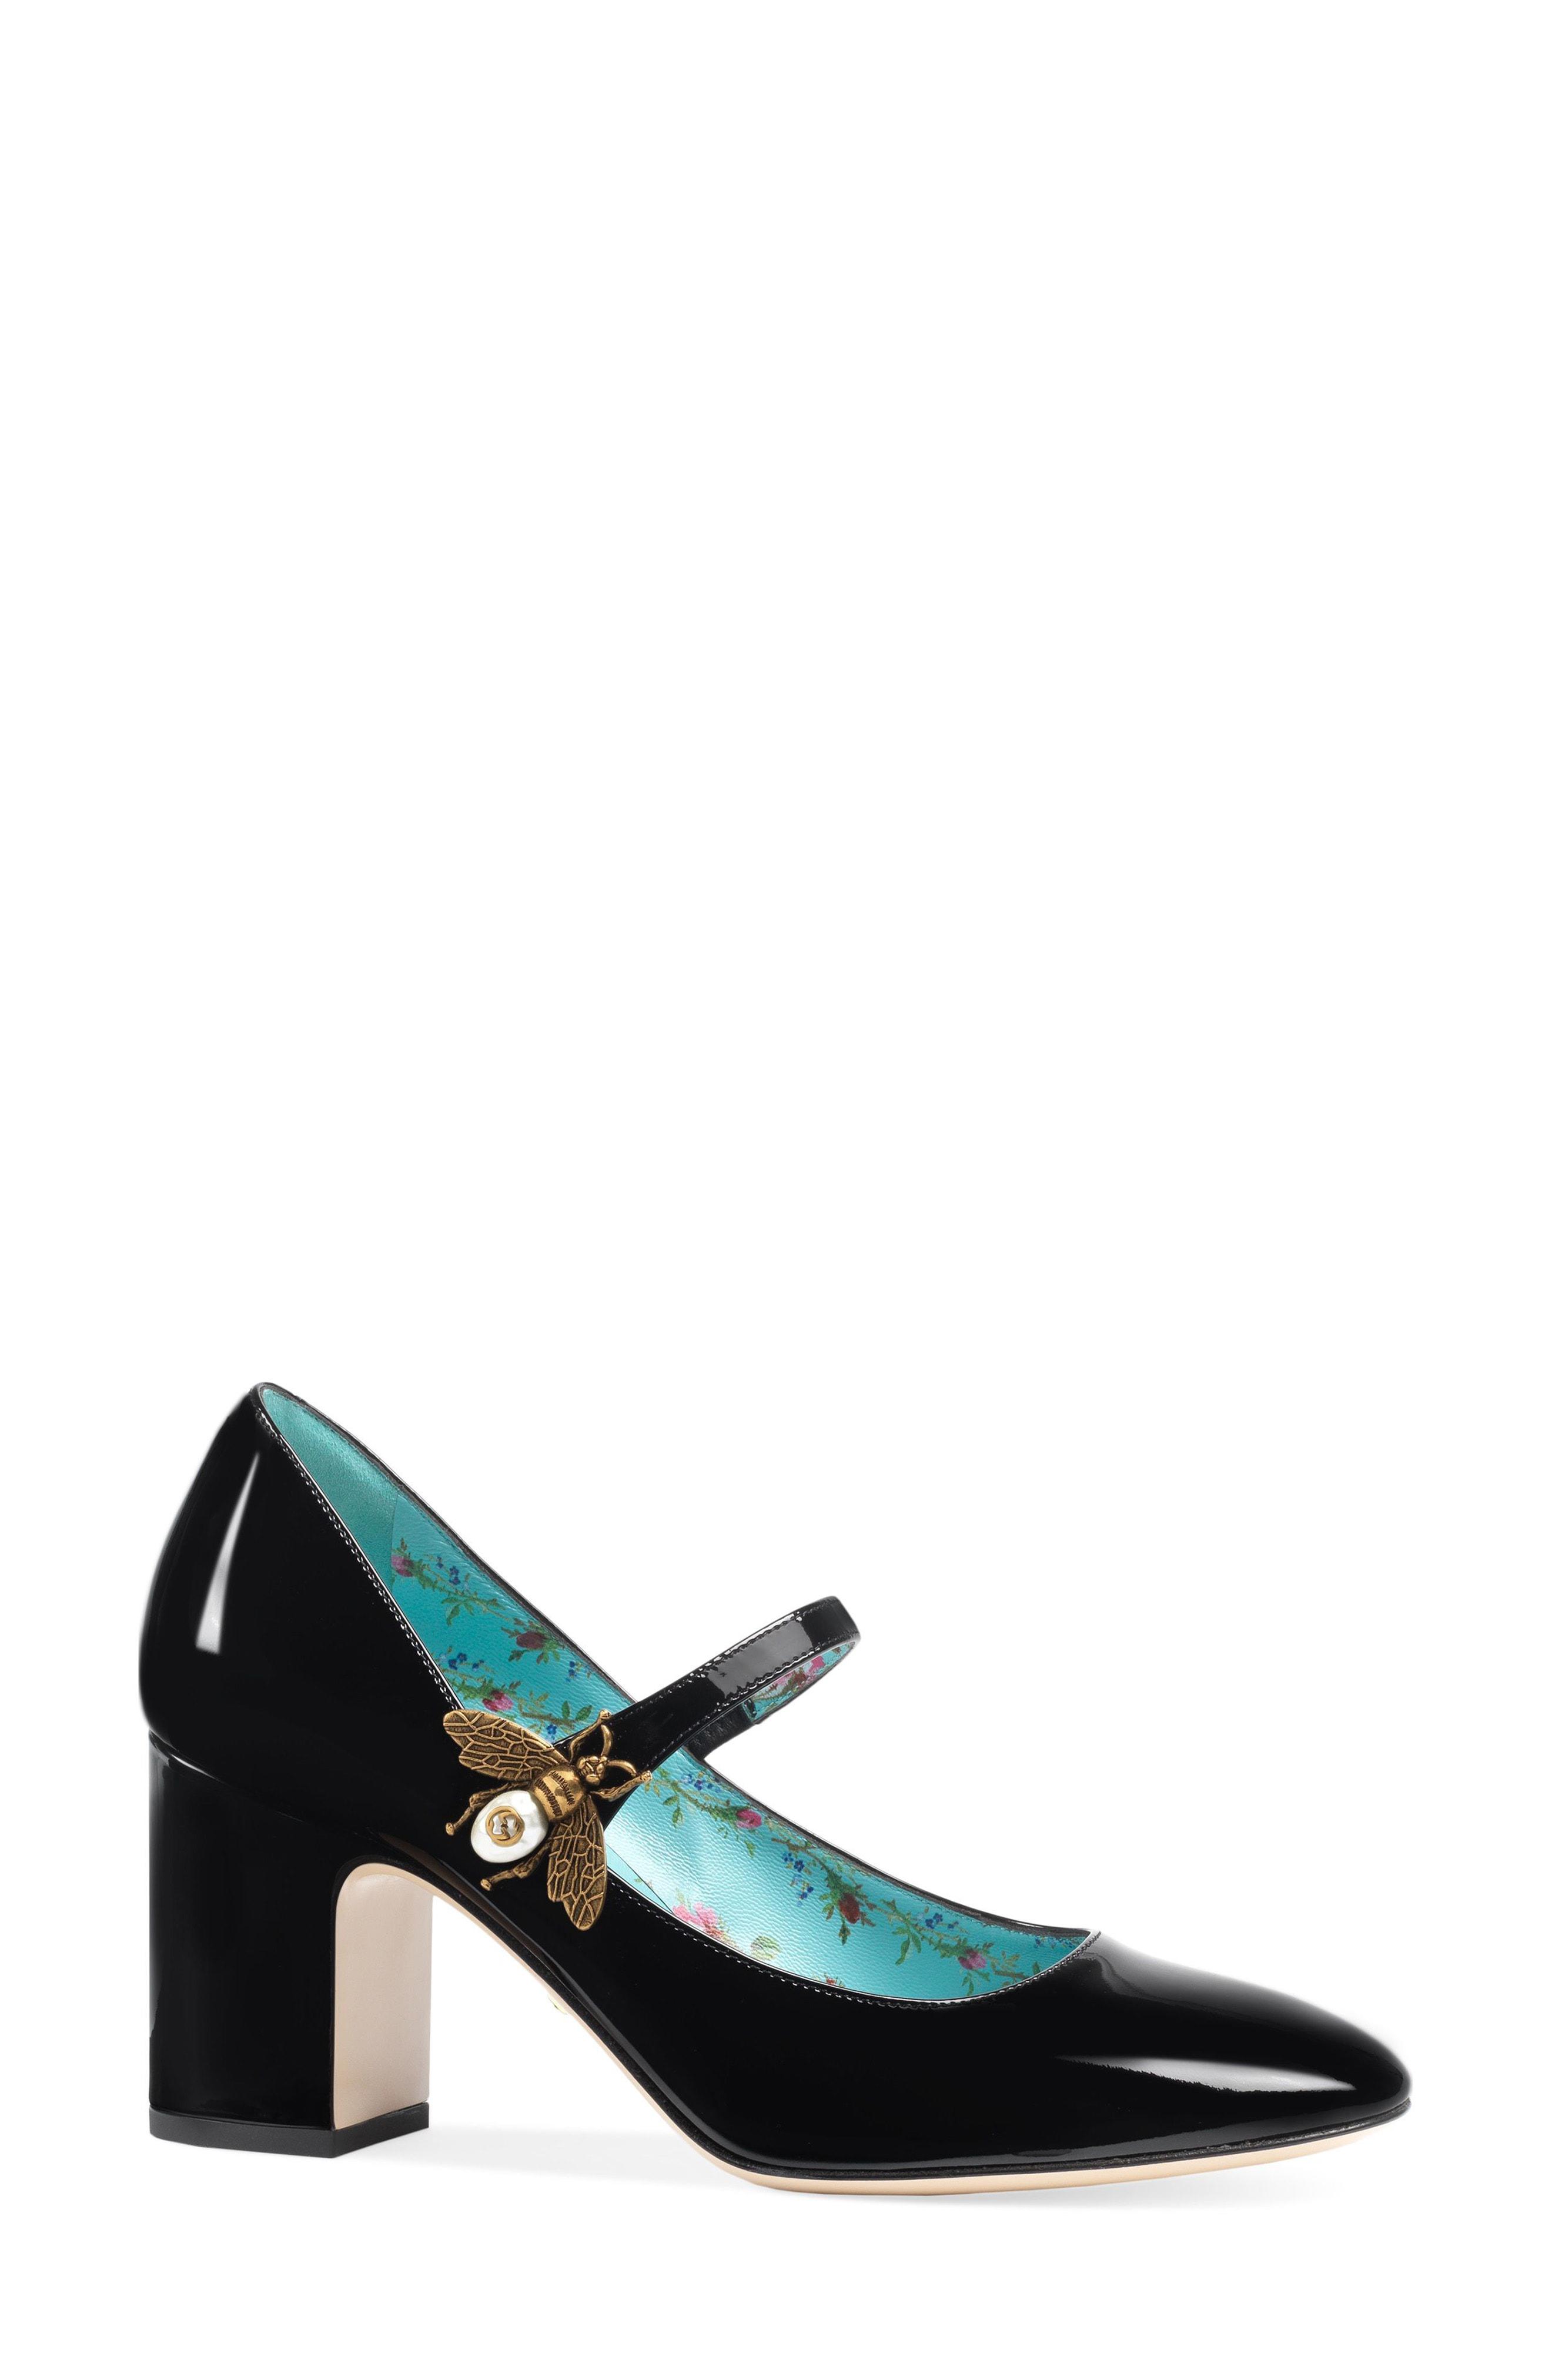 Gucci Lois Bee Mary Jane Pump in Black Leather (Black) - Lyst